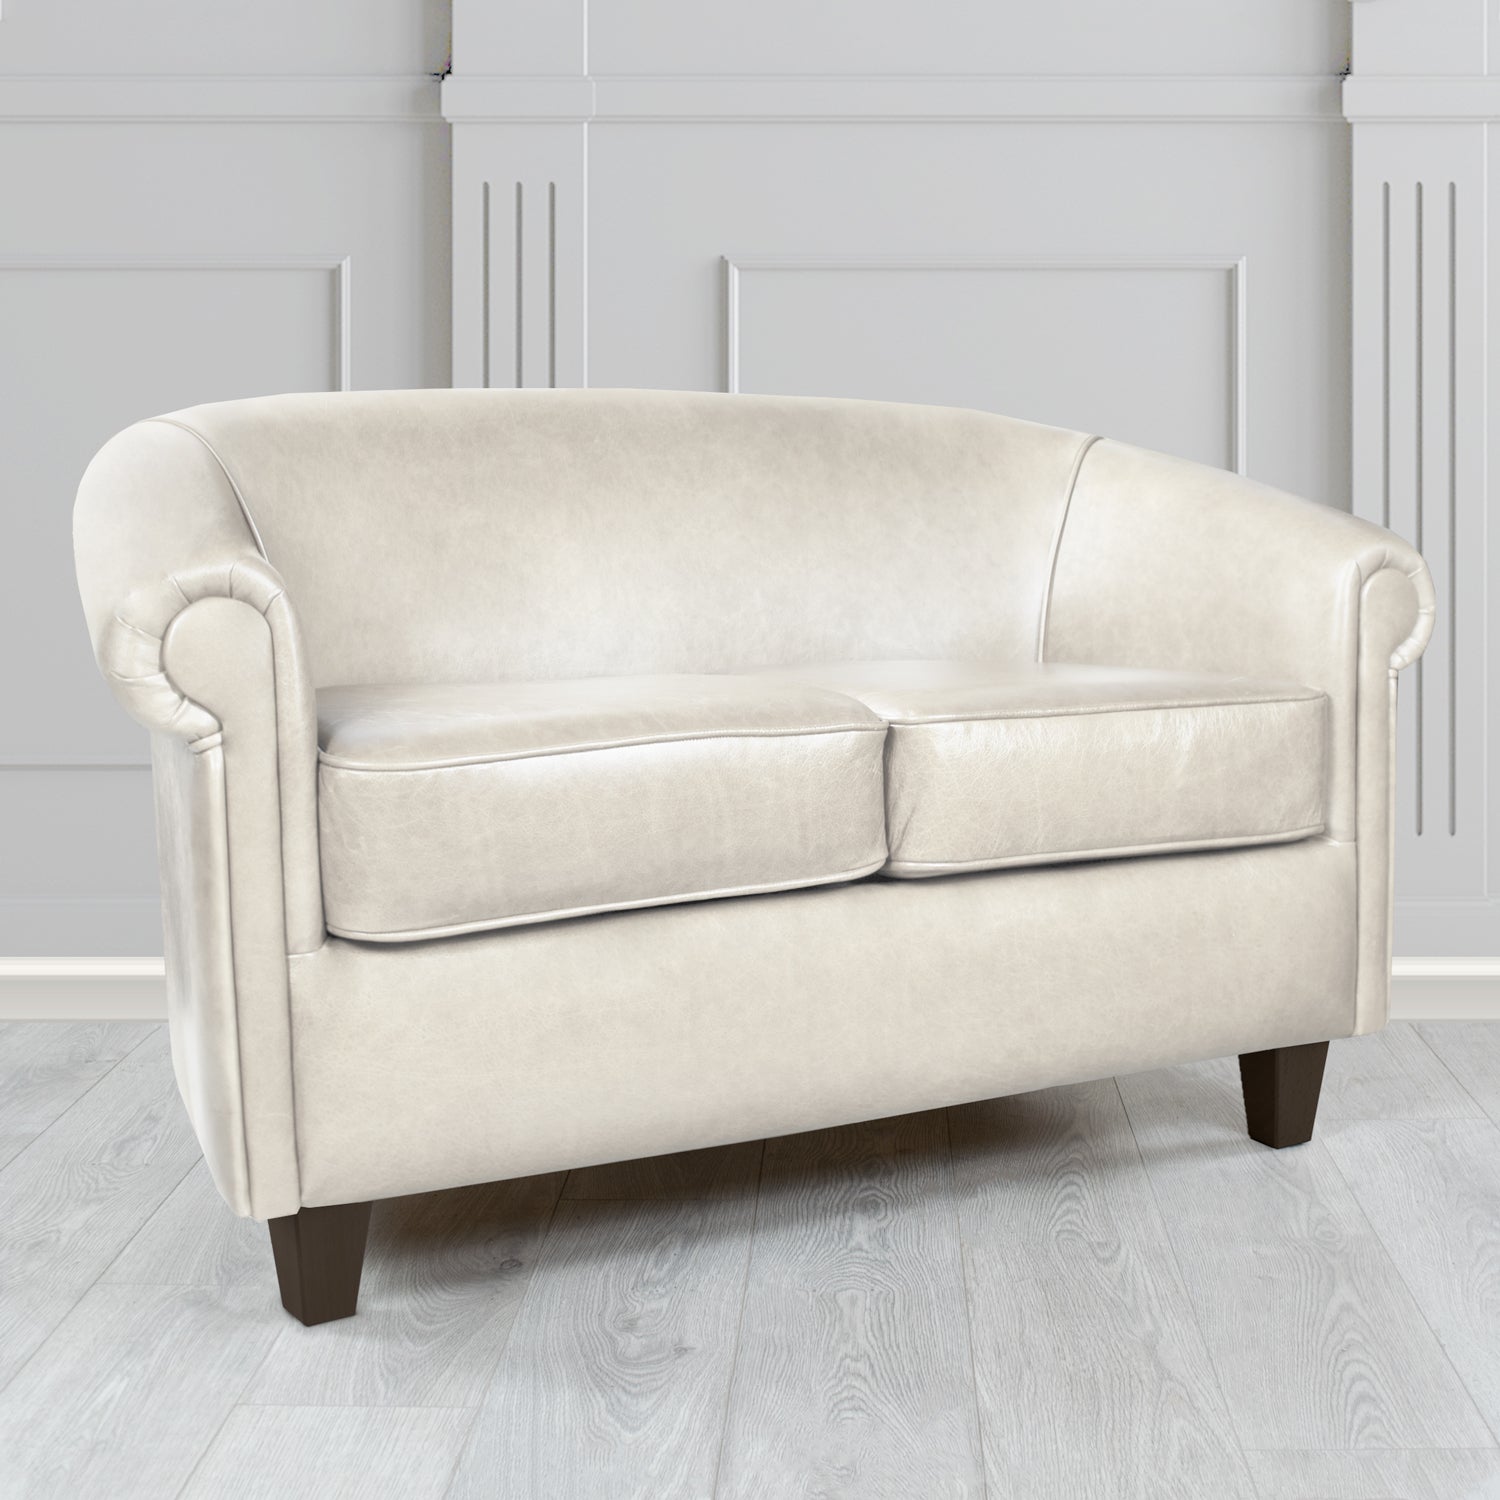 Siena 2 Seater Tub Sofa in Crib 5 Old English Ghost Genuine Leather - The Tub Chair Shop